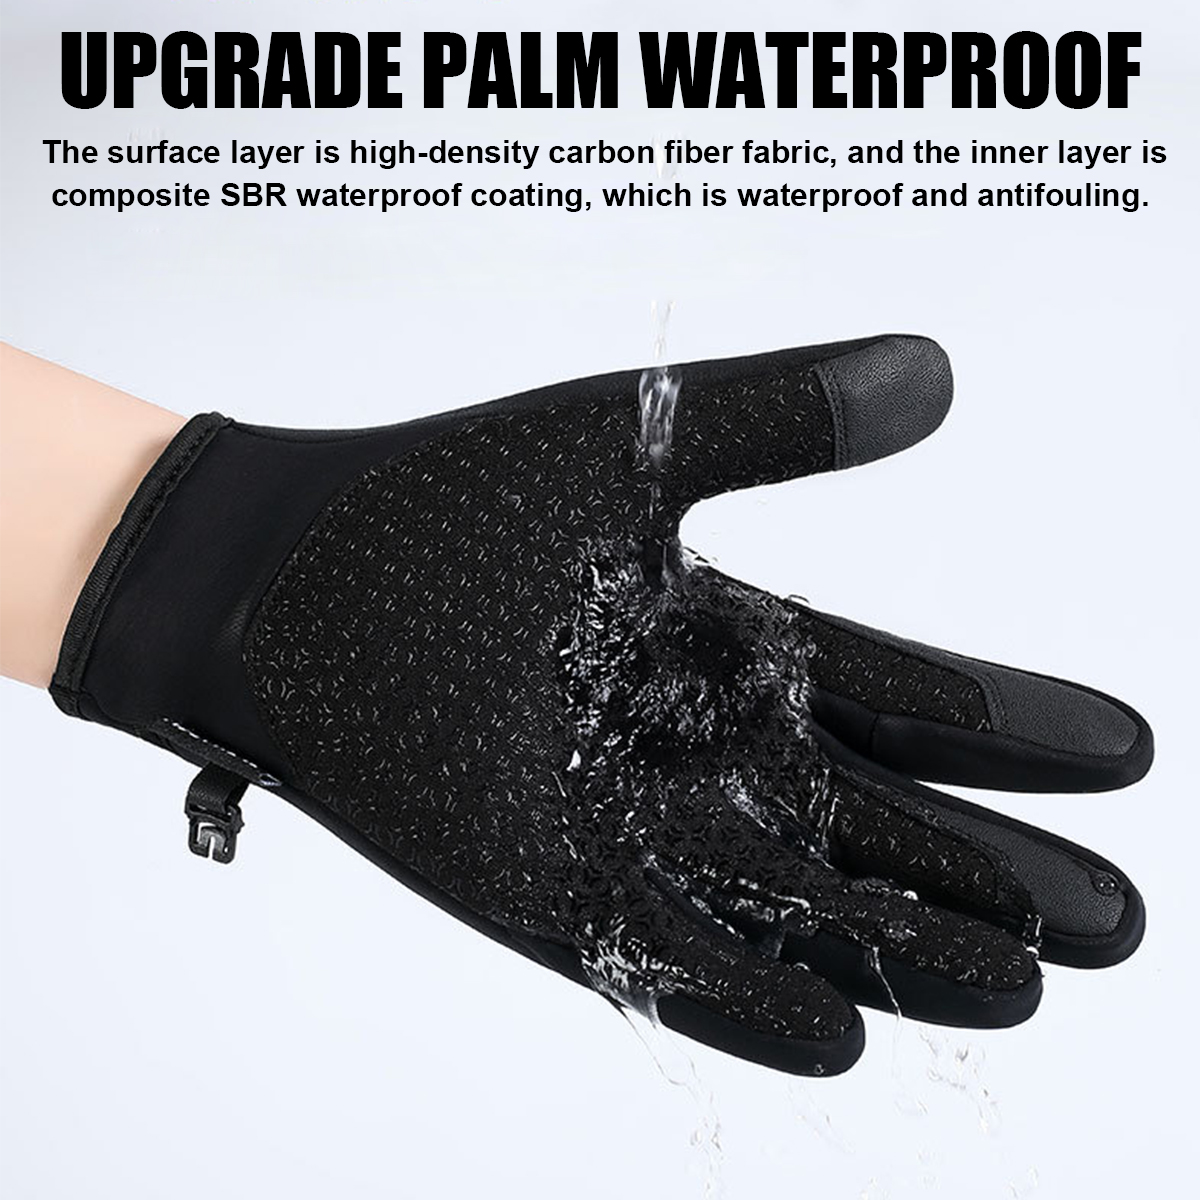 Winter-Warm-Touch-Screen-Thermal-Gloves-Ski-Snow-Snowboard-Cycling-Waterproof-Winter-Gloves-1921375-9